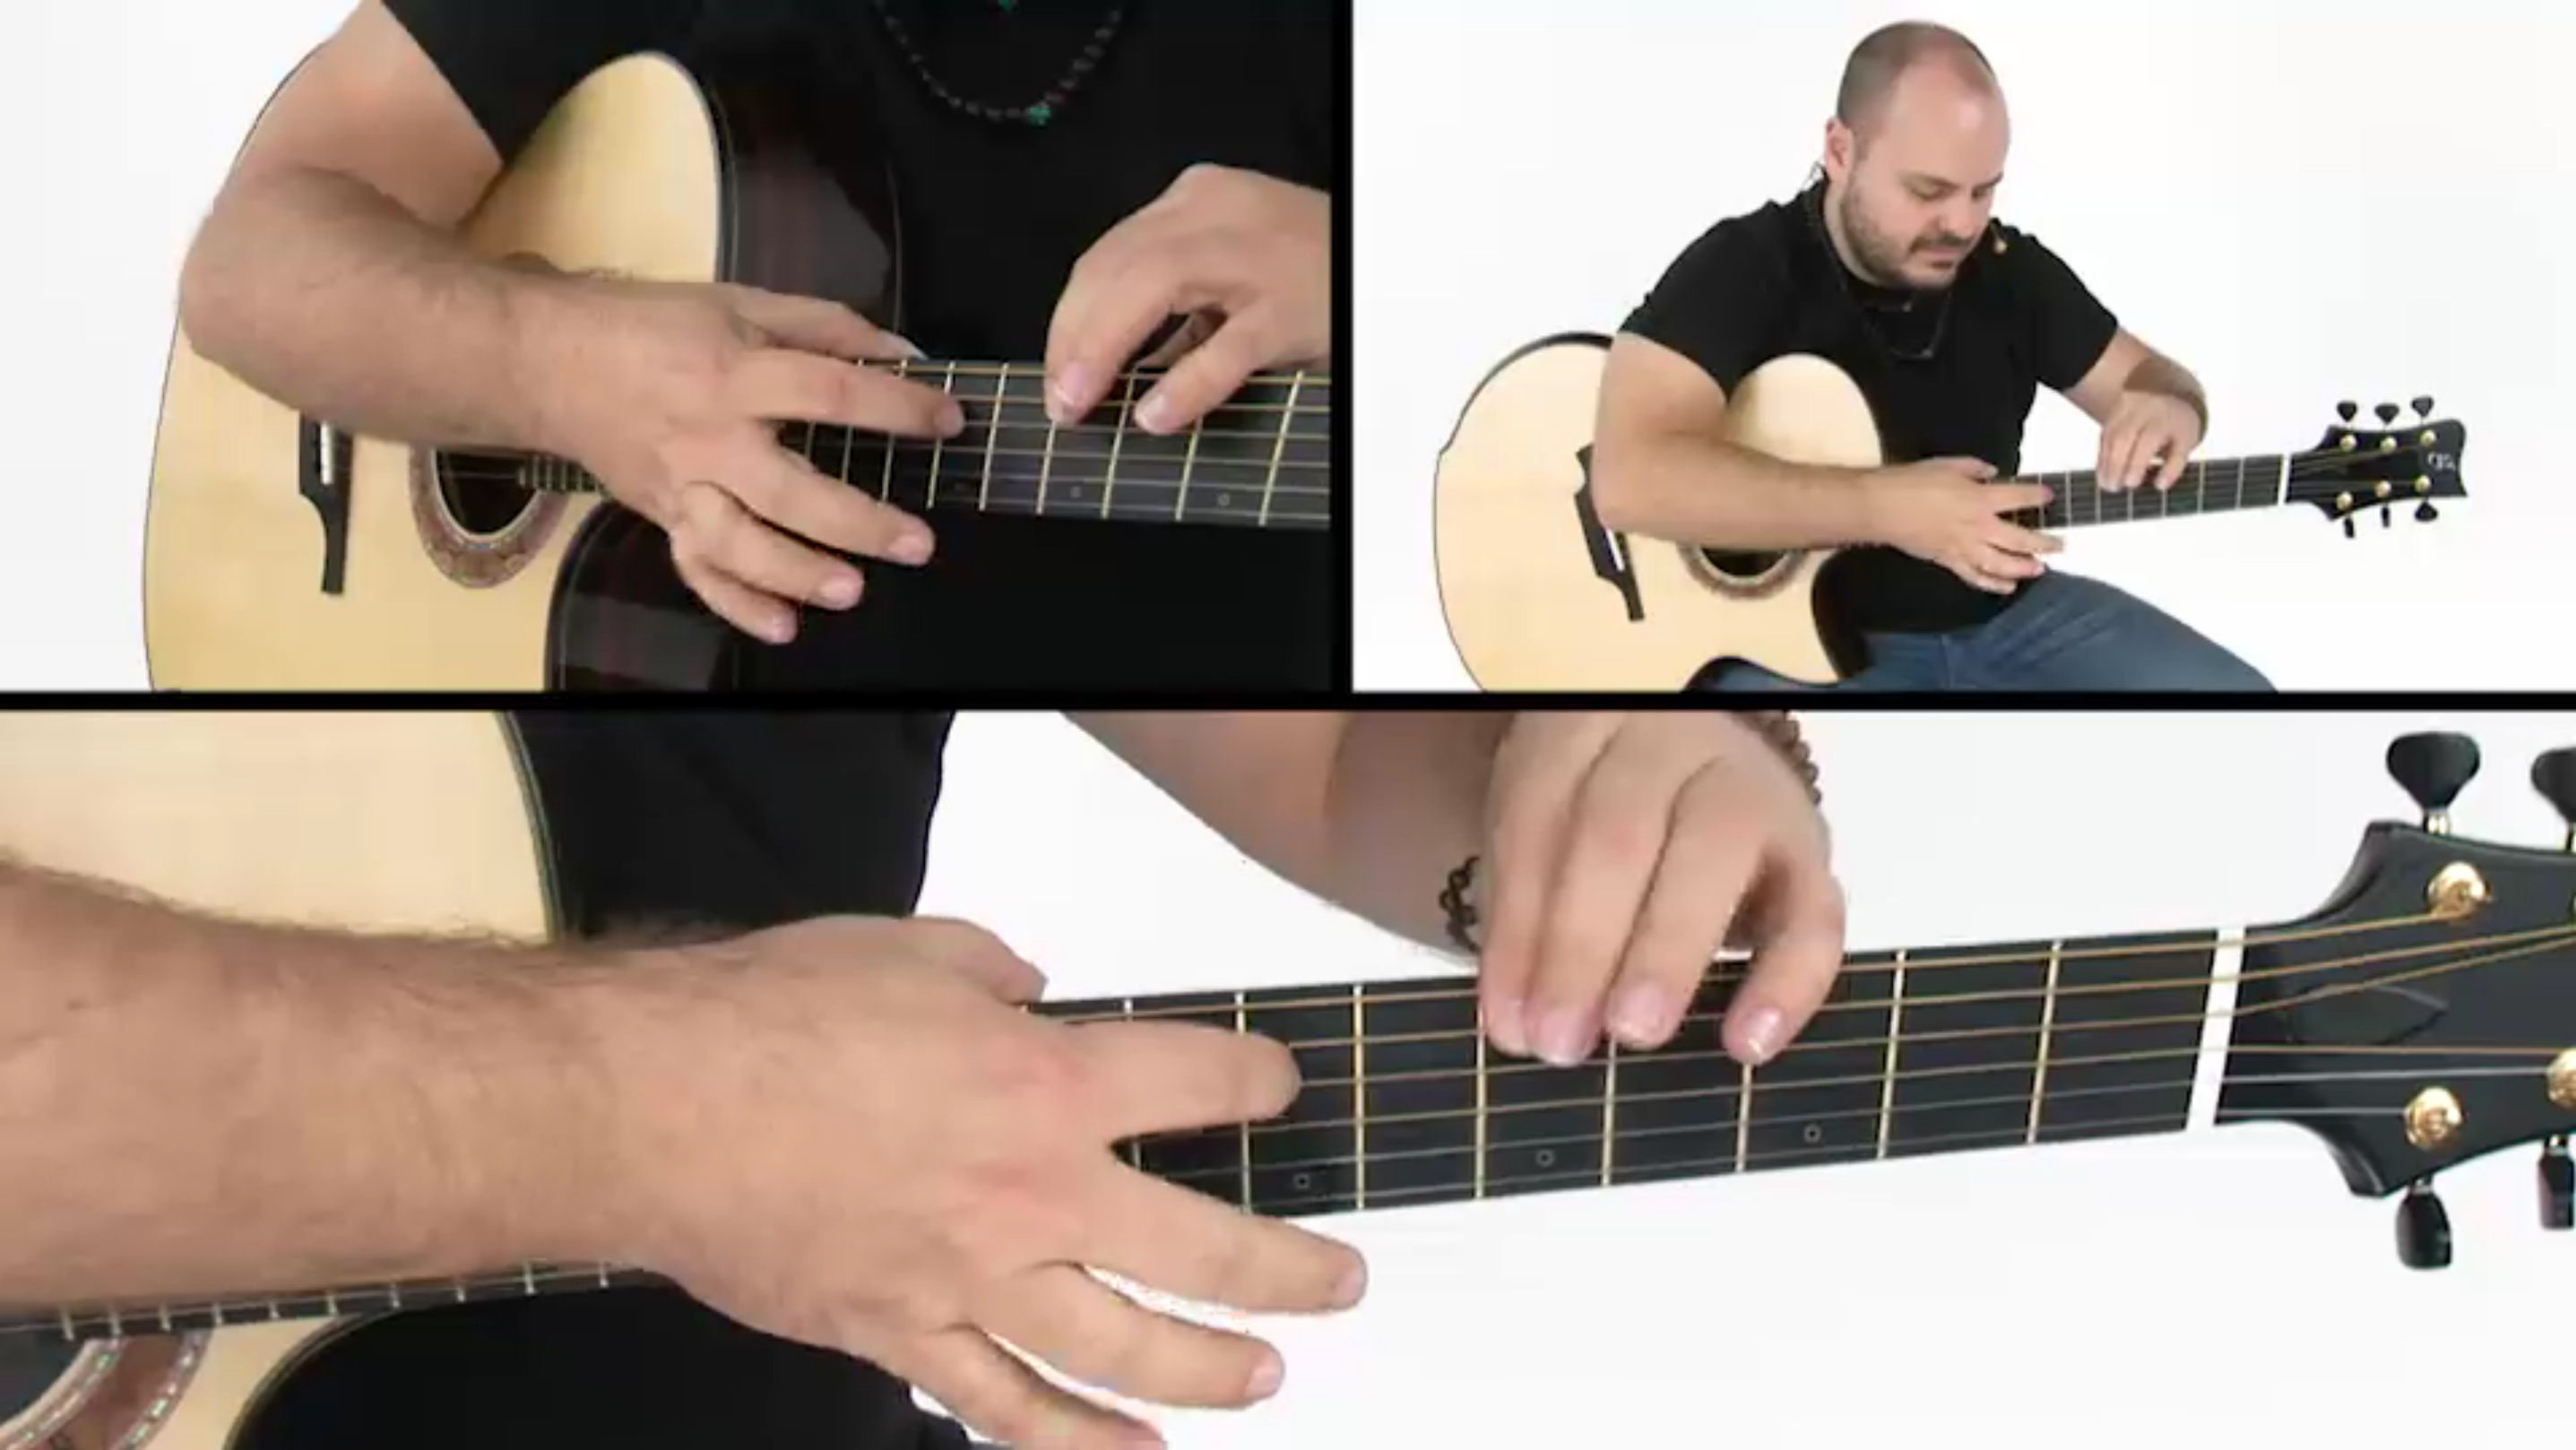 Rylynn by Andy McKee - Solo Guitar - Guitar Instructor